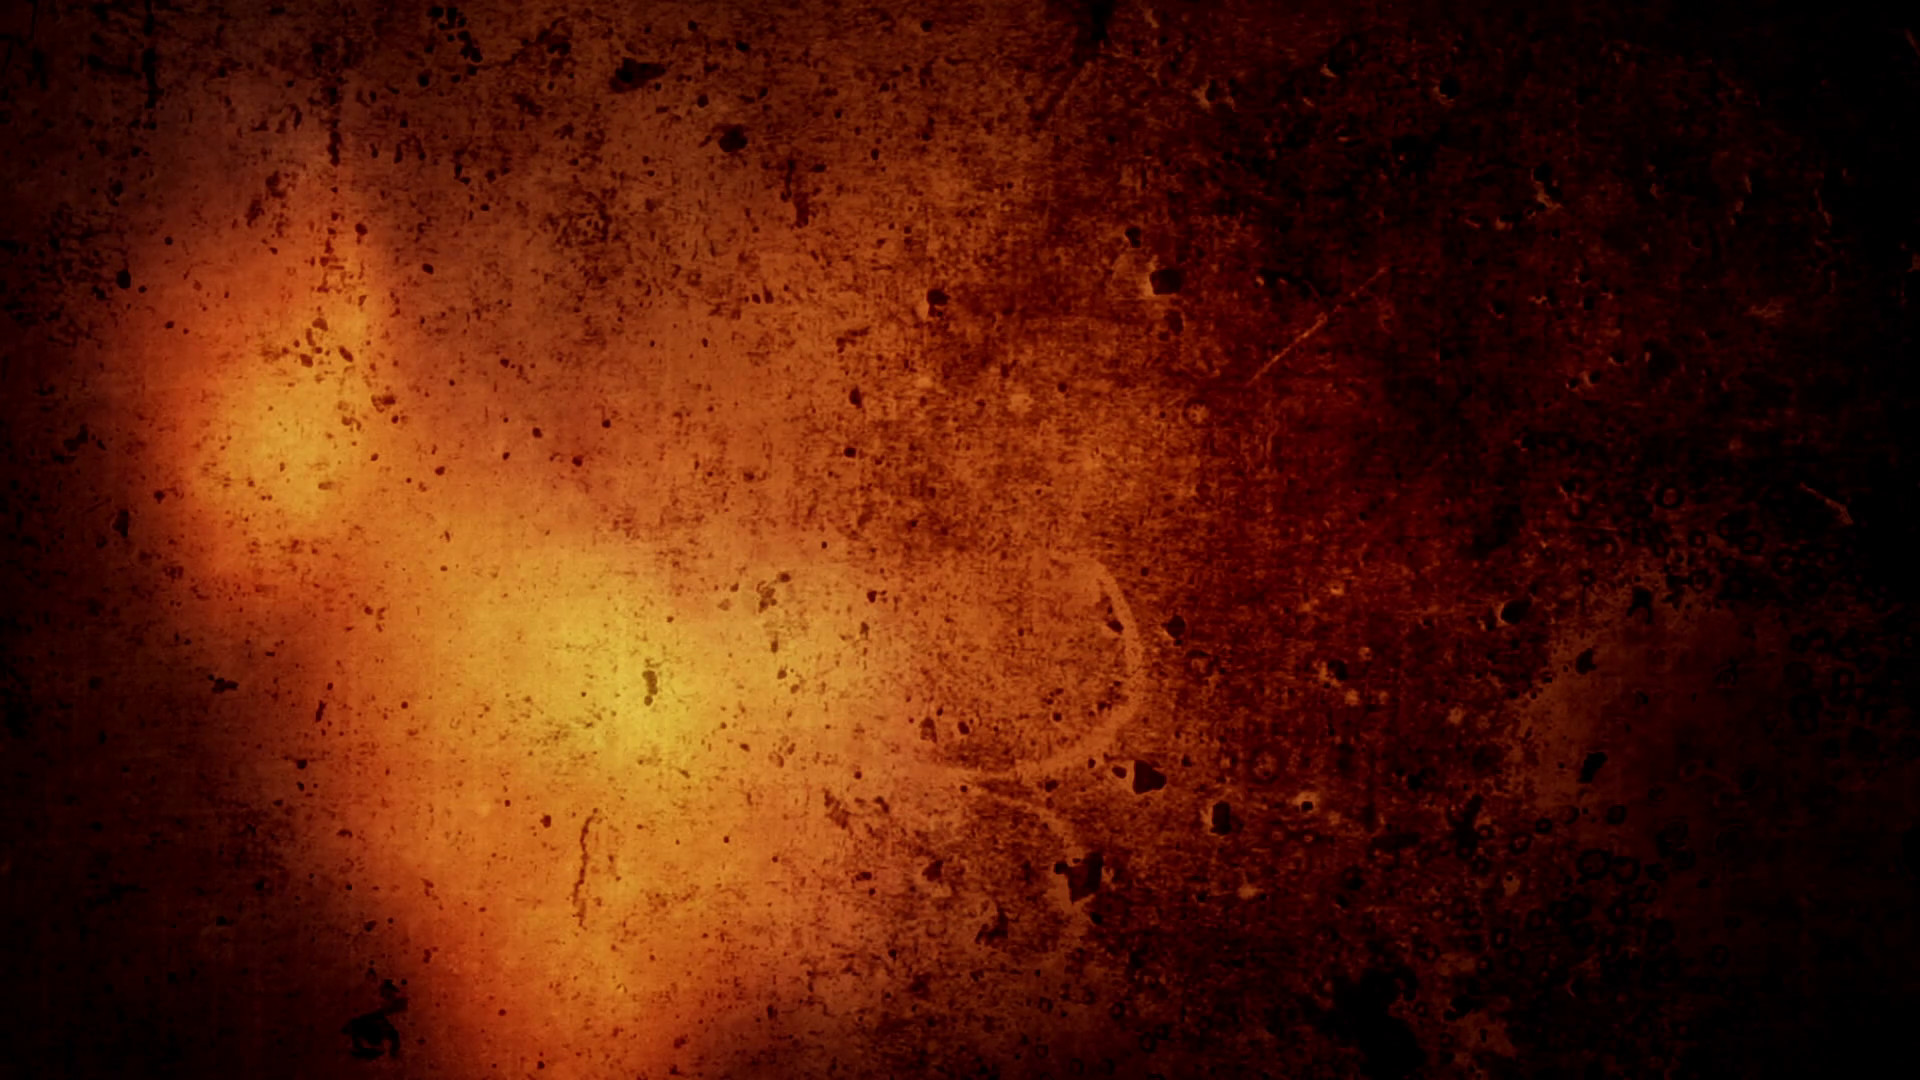 1920x1080 Grunge abstract textured background animation stock footage. An abstract  surreal grungy background with soft lighting shining on the surface.